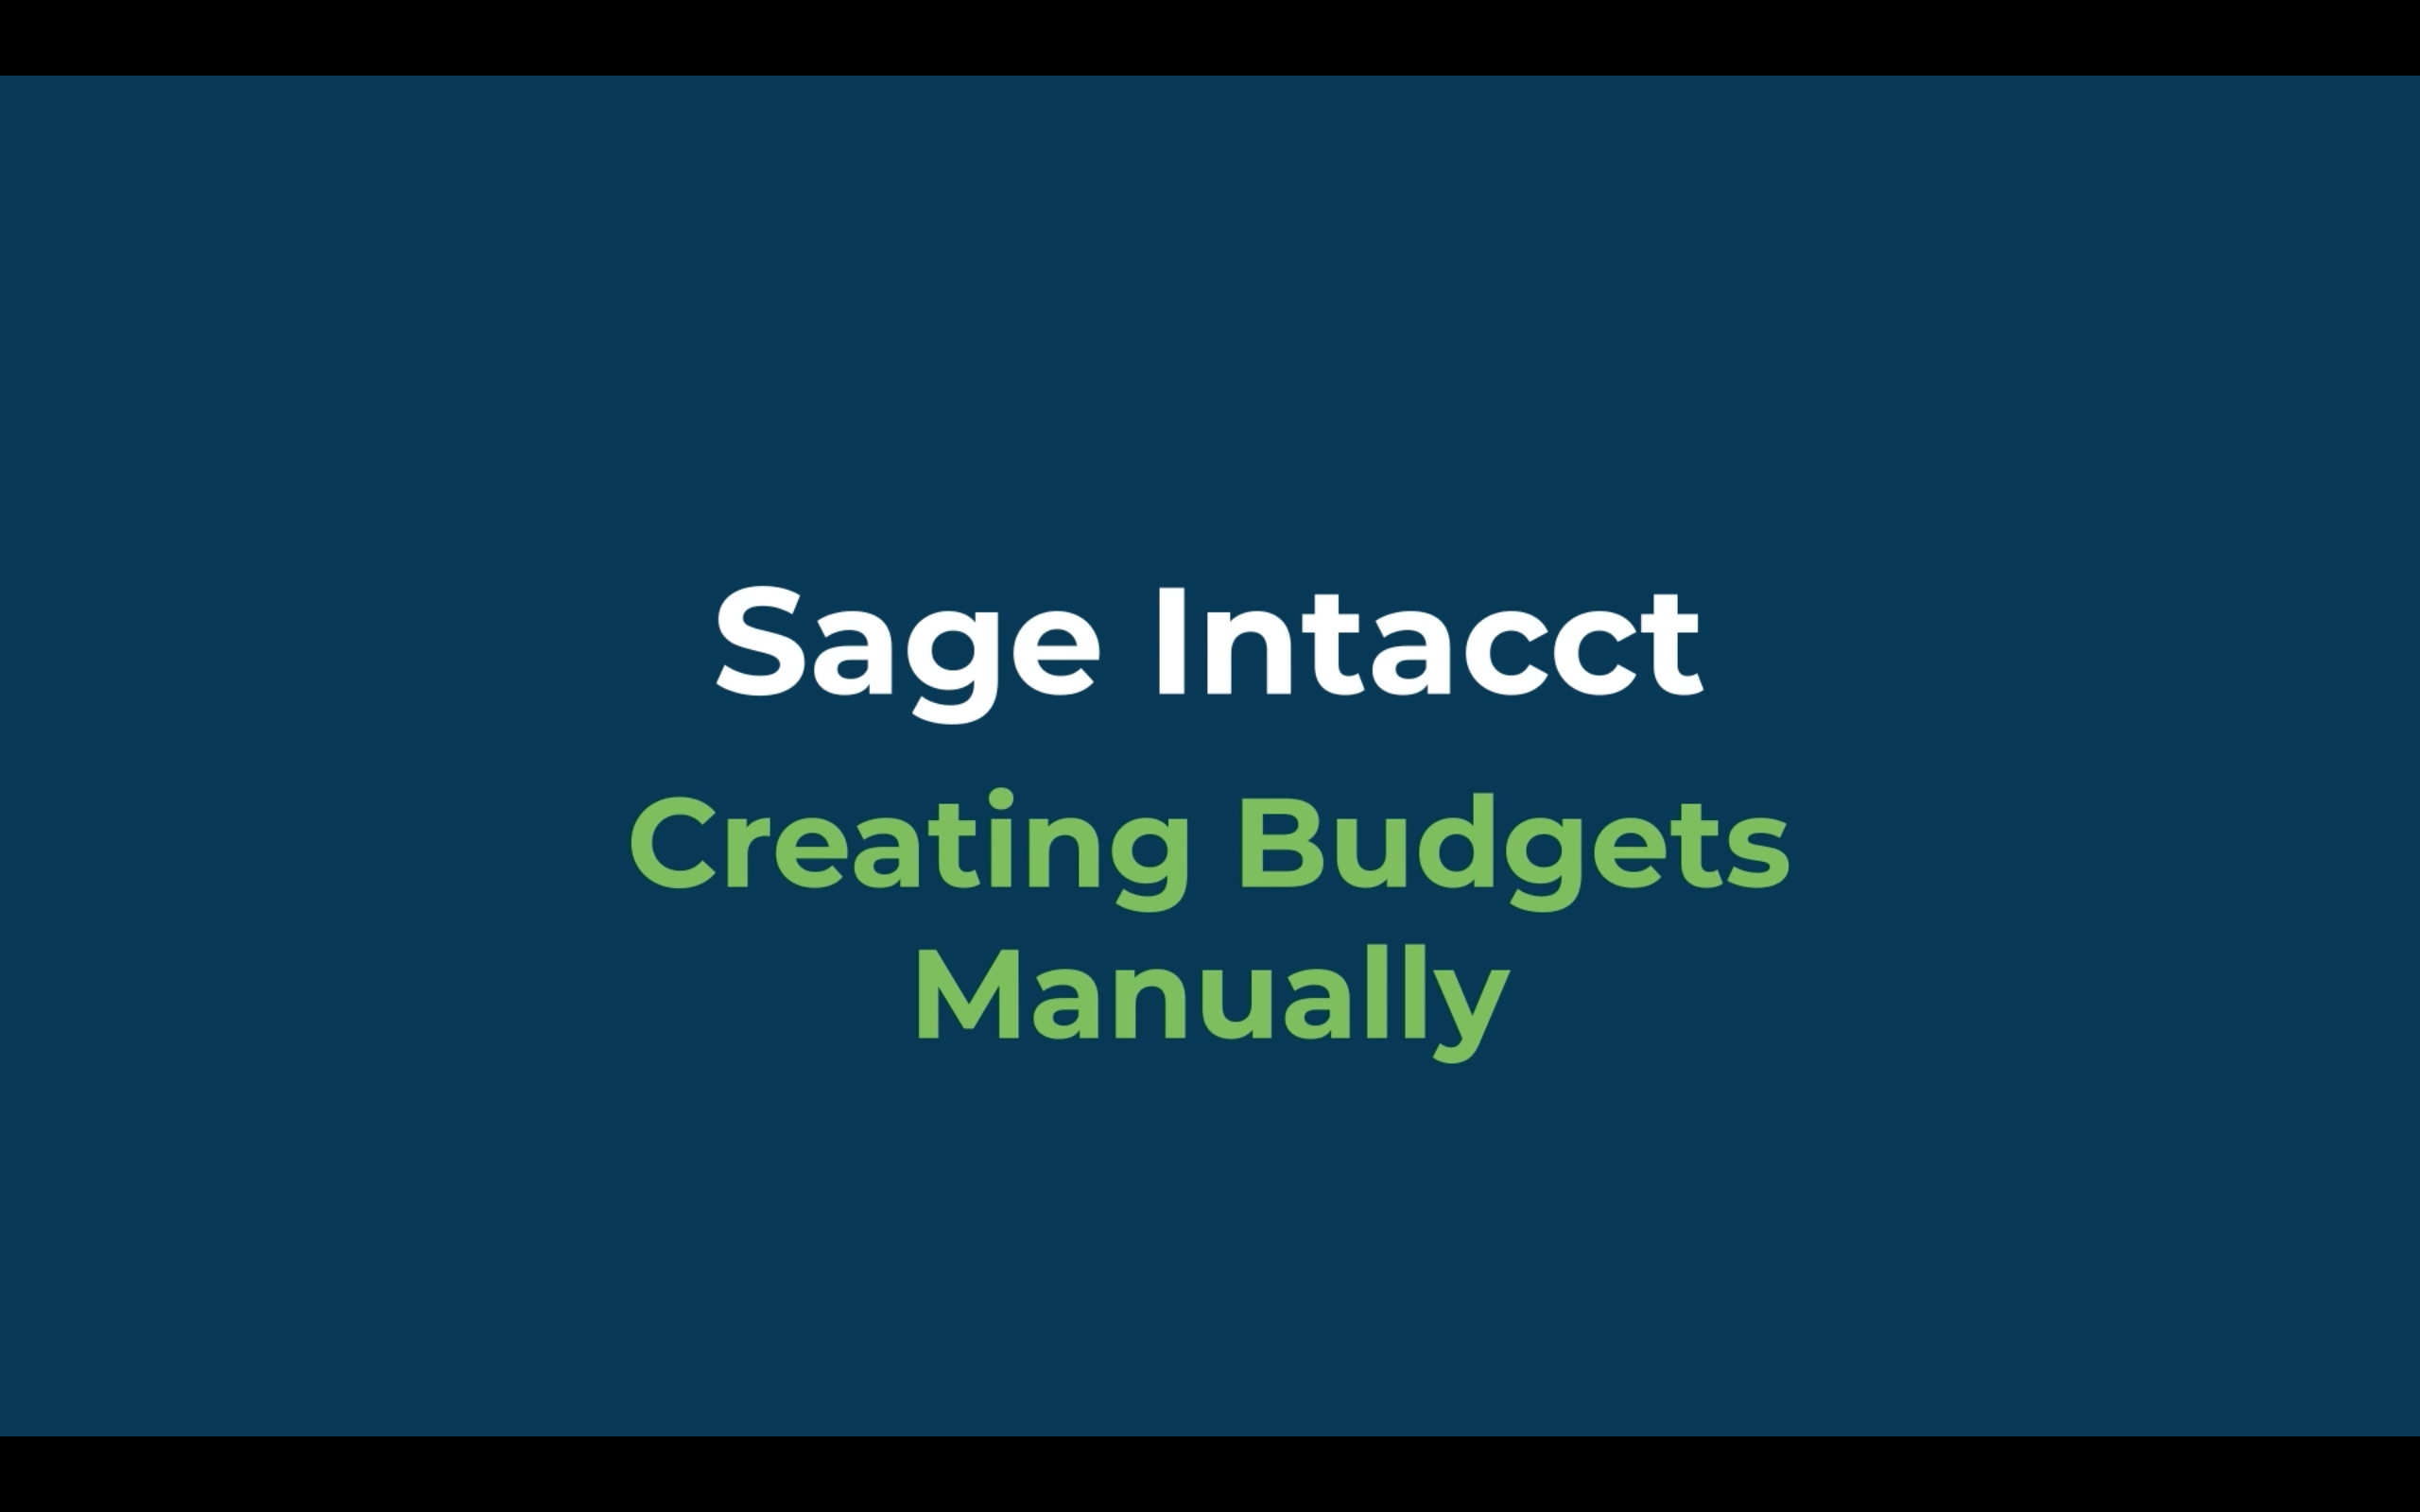 creating budgets manually in sage intacct